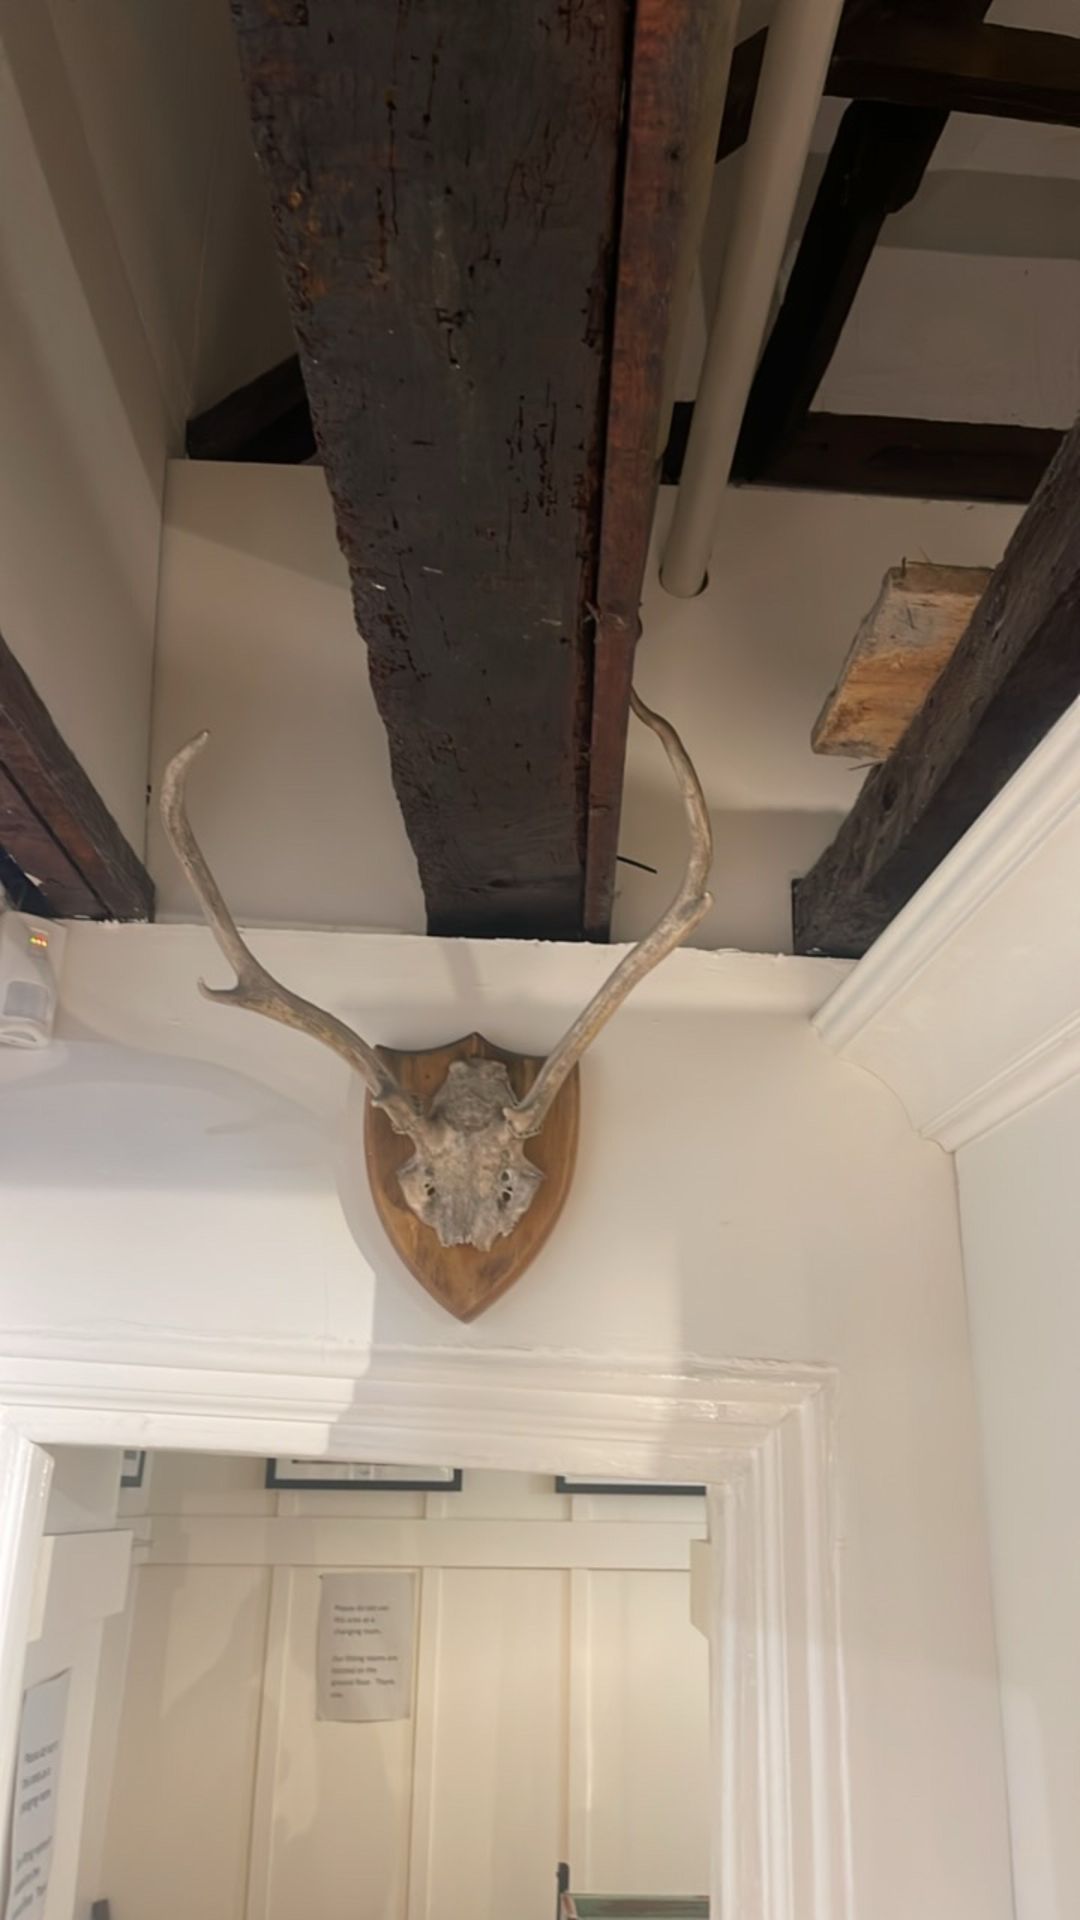 Wall Antlers - Image 5 of 5